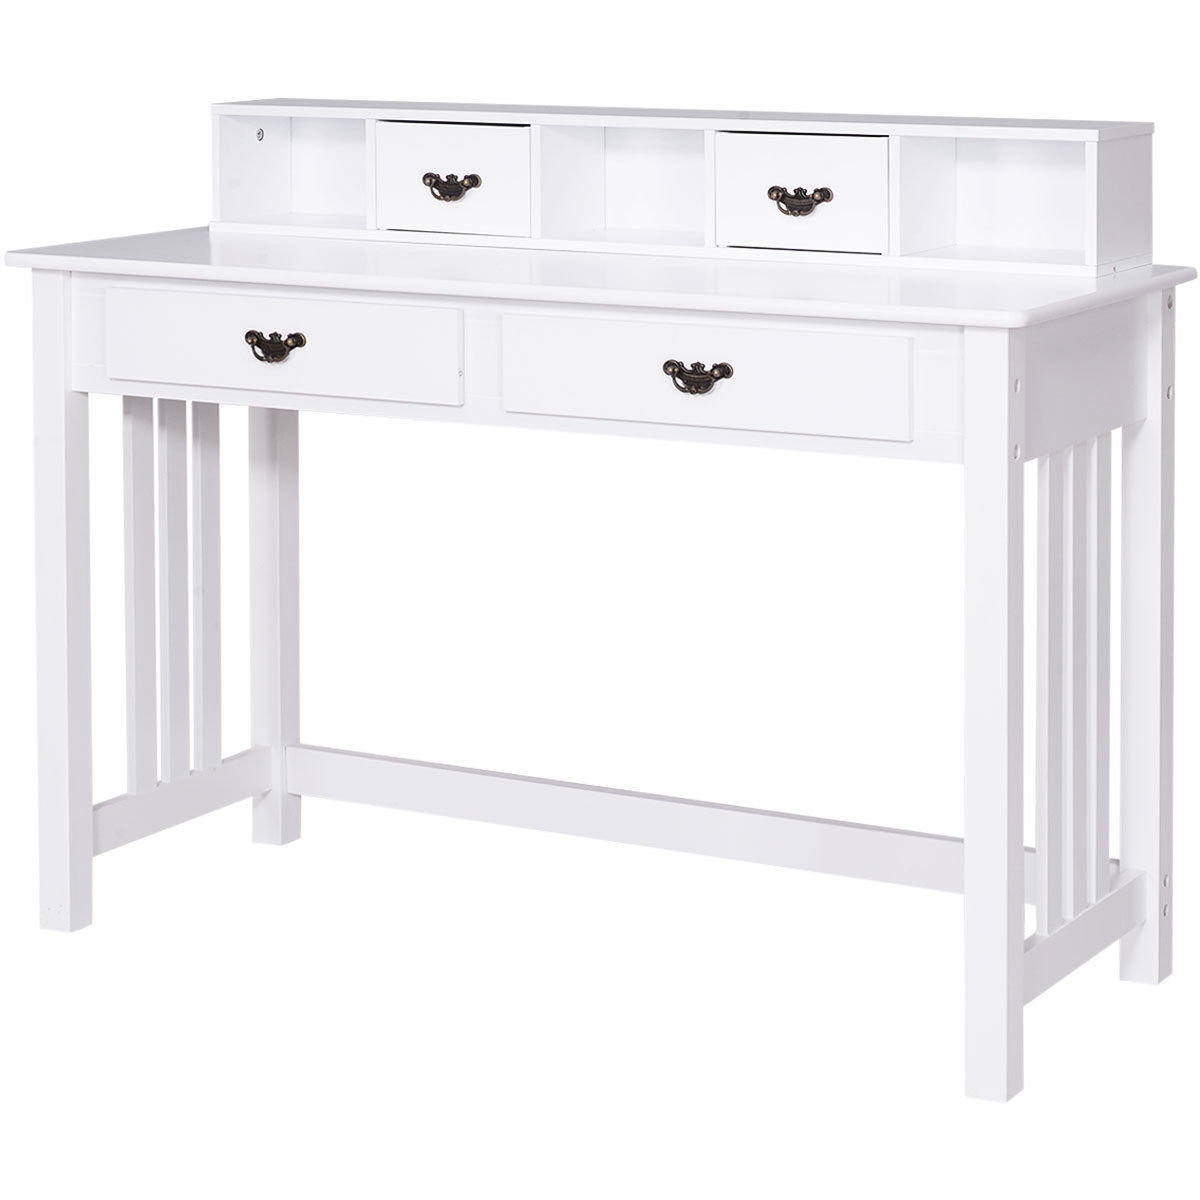 Writing Desk With Drawers And Removable Hutch Solid Wood Legs Concise Style